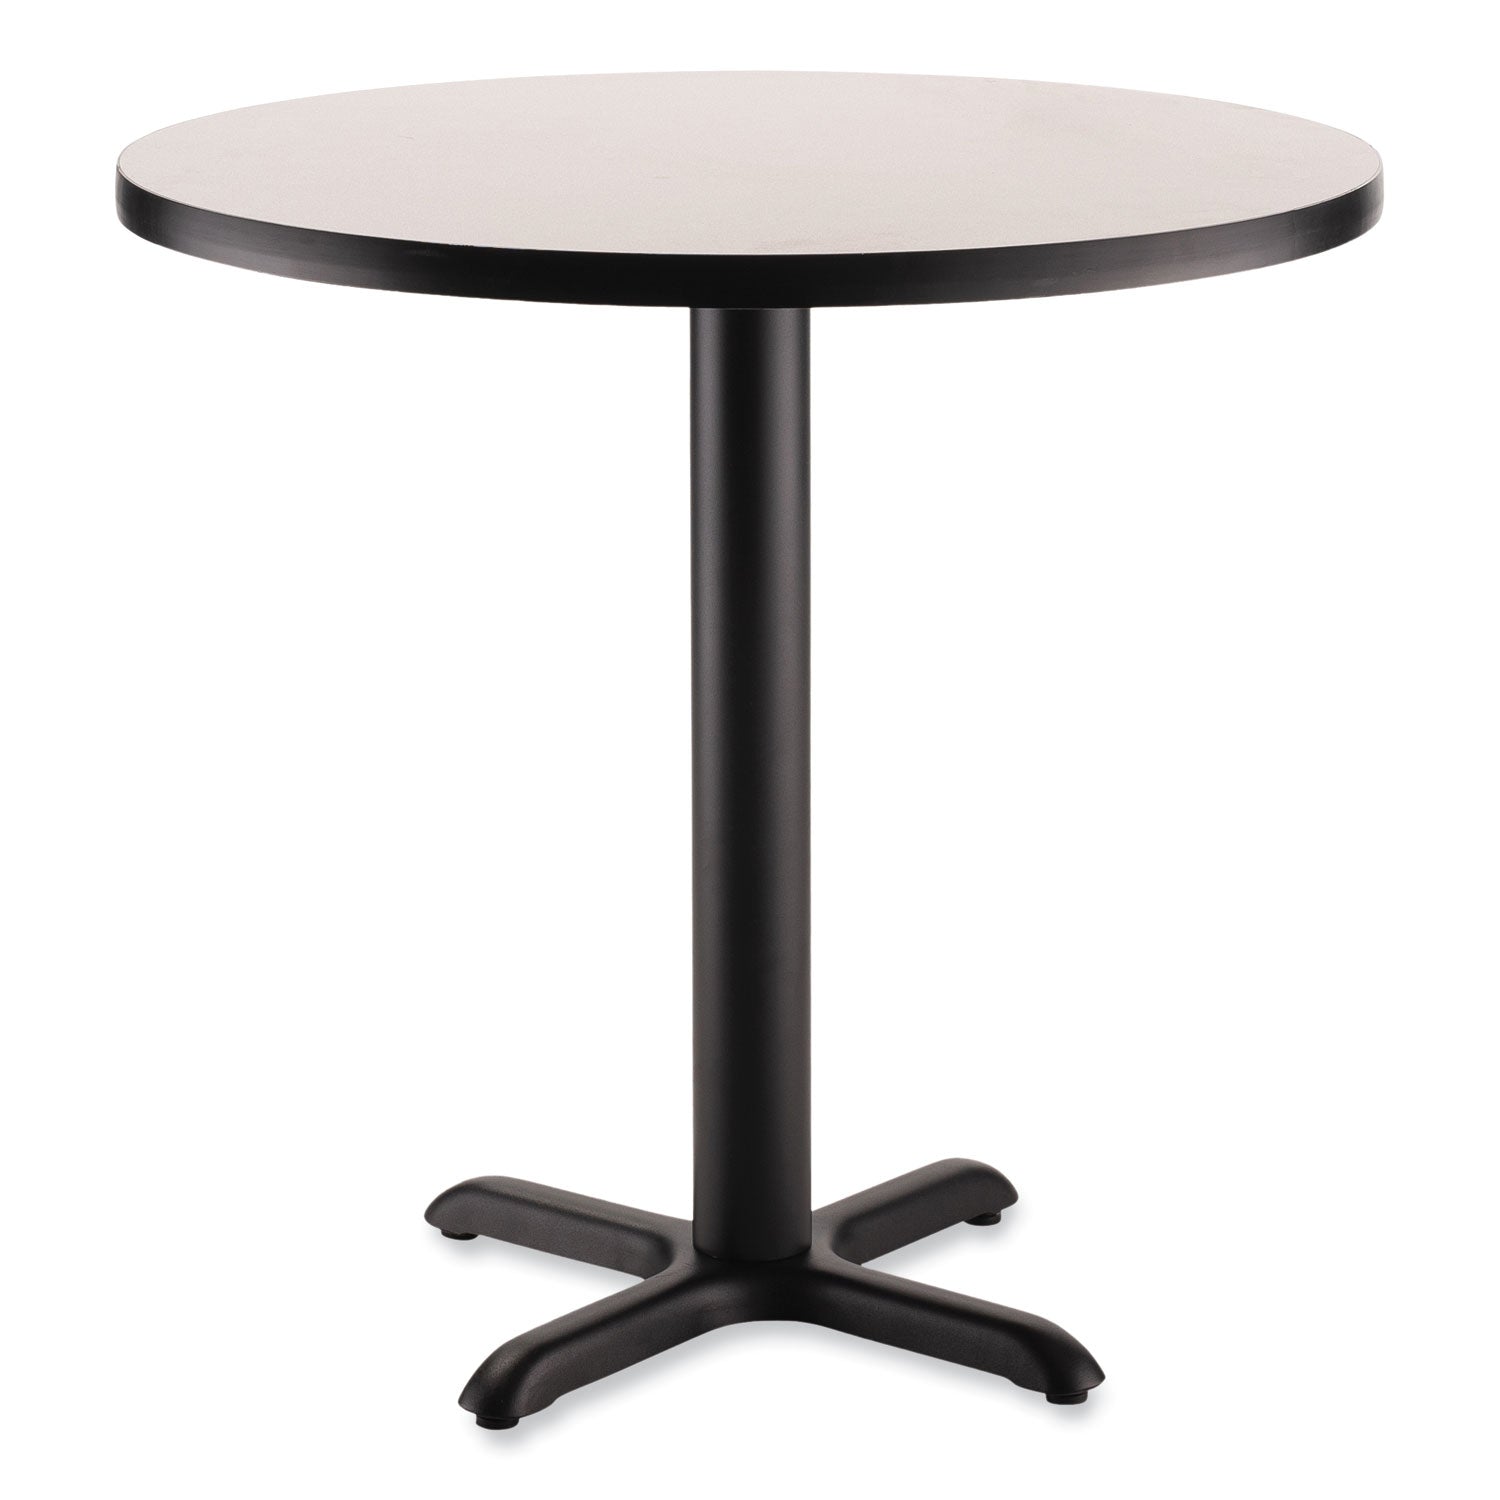 cafe-table-36-diameter-x-30h-round-top-x-base-gray-nebula-black-base-ships-in-7-10-business-days_npsct13636xd1gy - 1